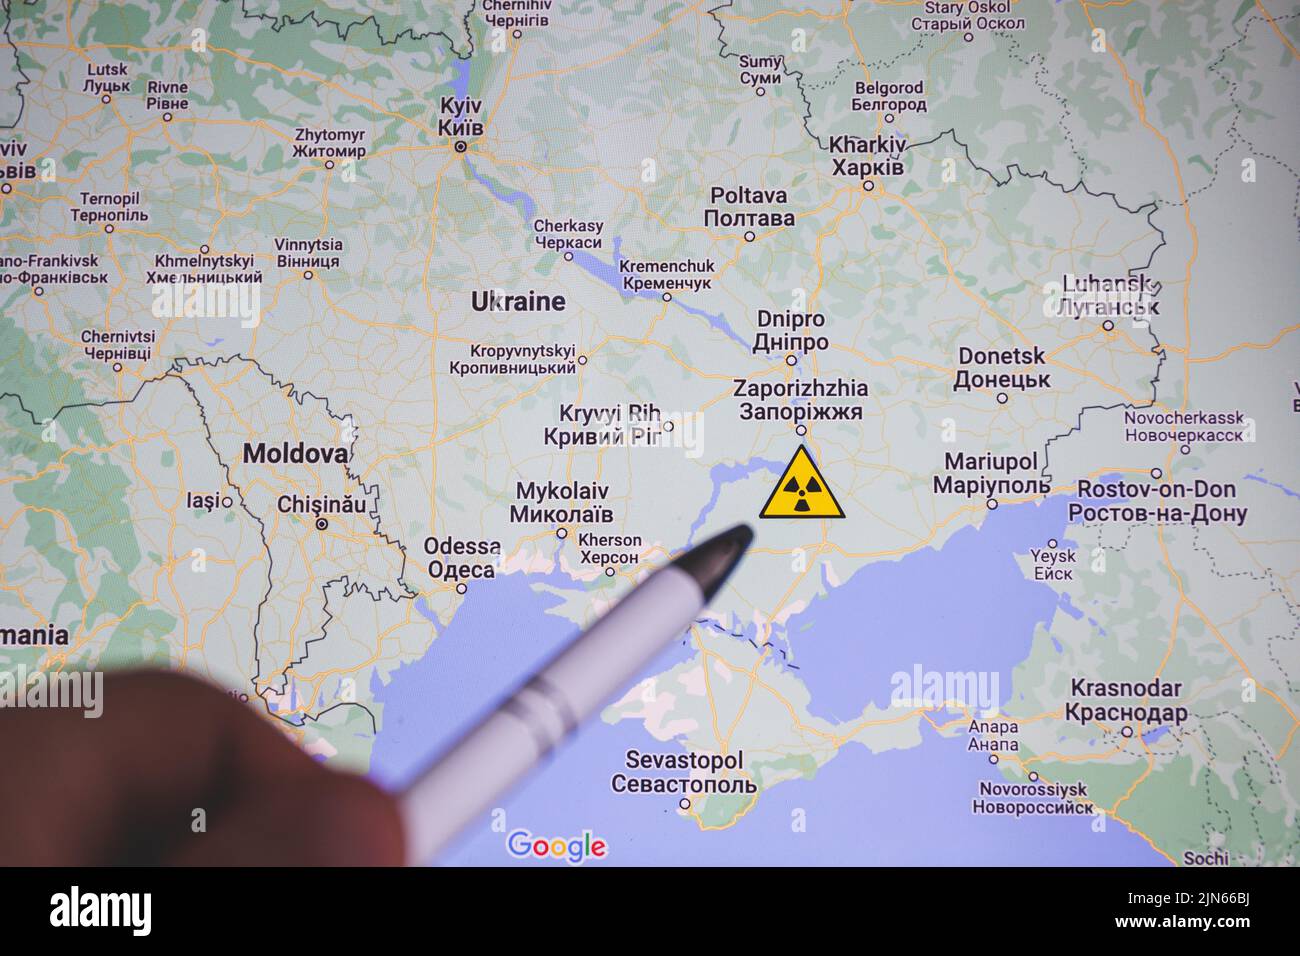 Zaporizhzhia nuclear power plant on map. The danger of nuclear leak and radiation. War in Ukraine Stock Photo